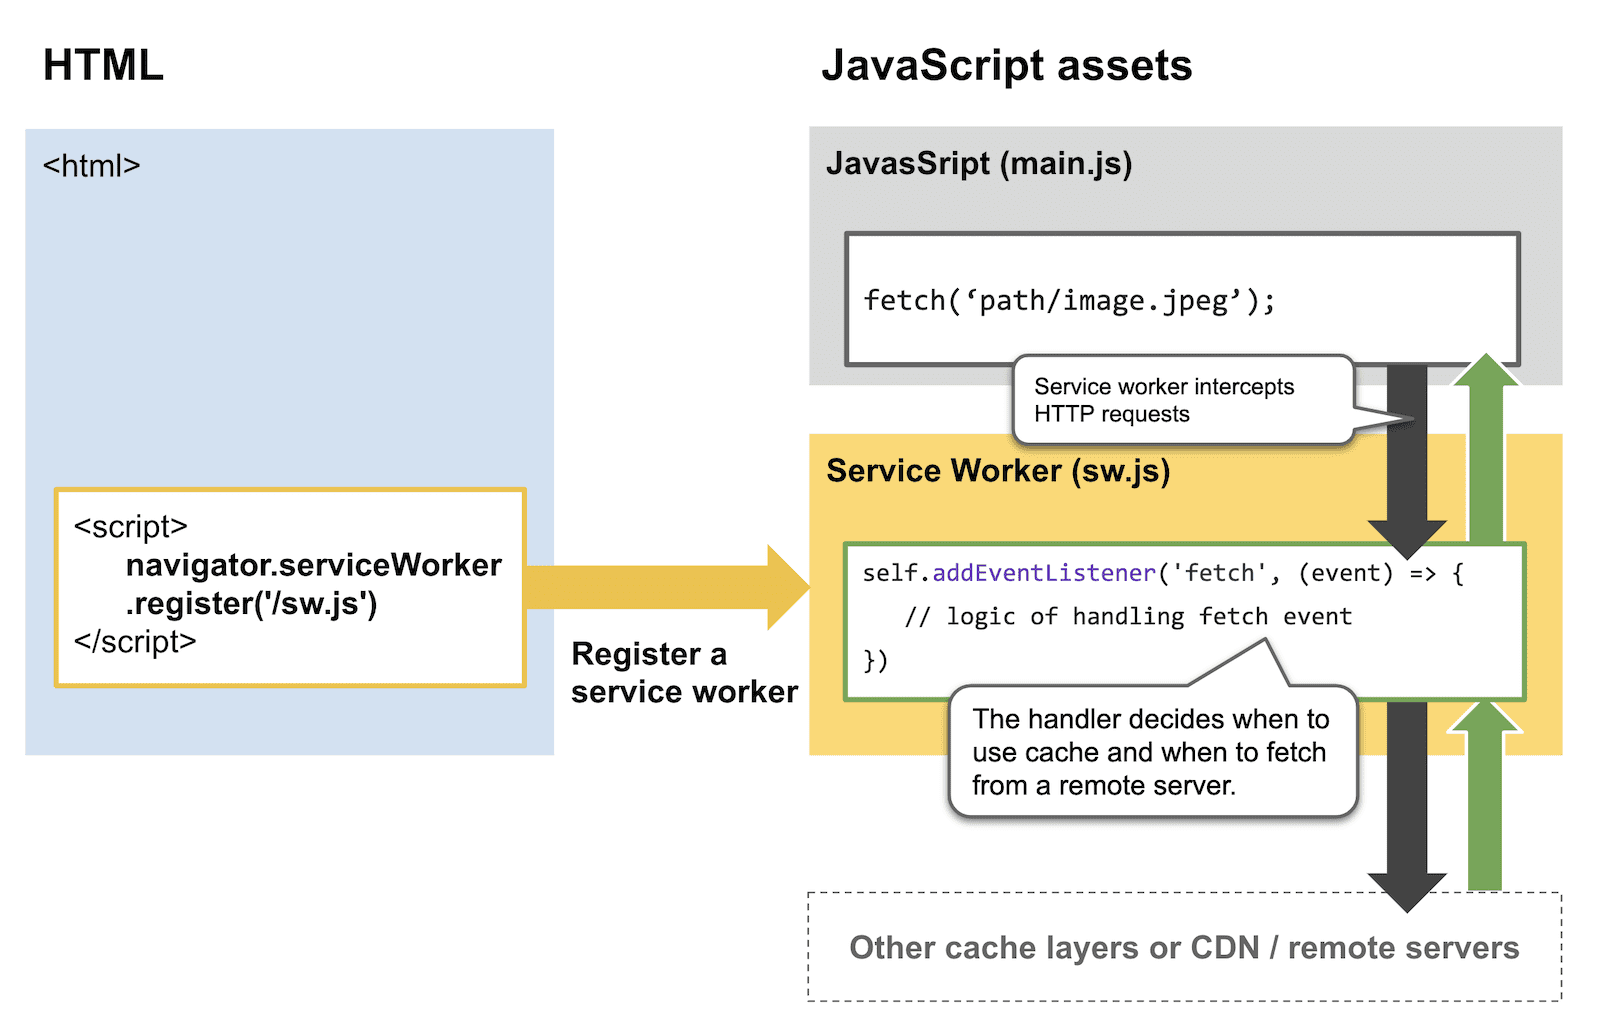 A diagram showing how service workers intercept HTTP requests